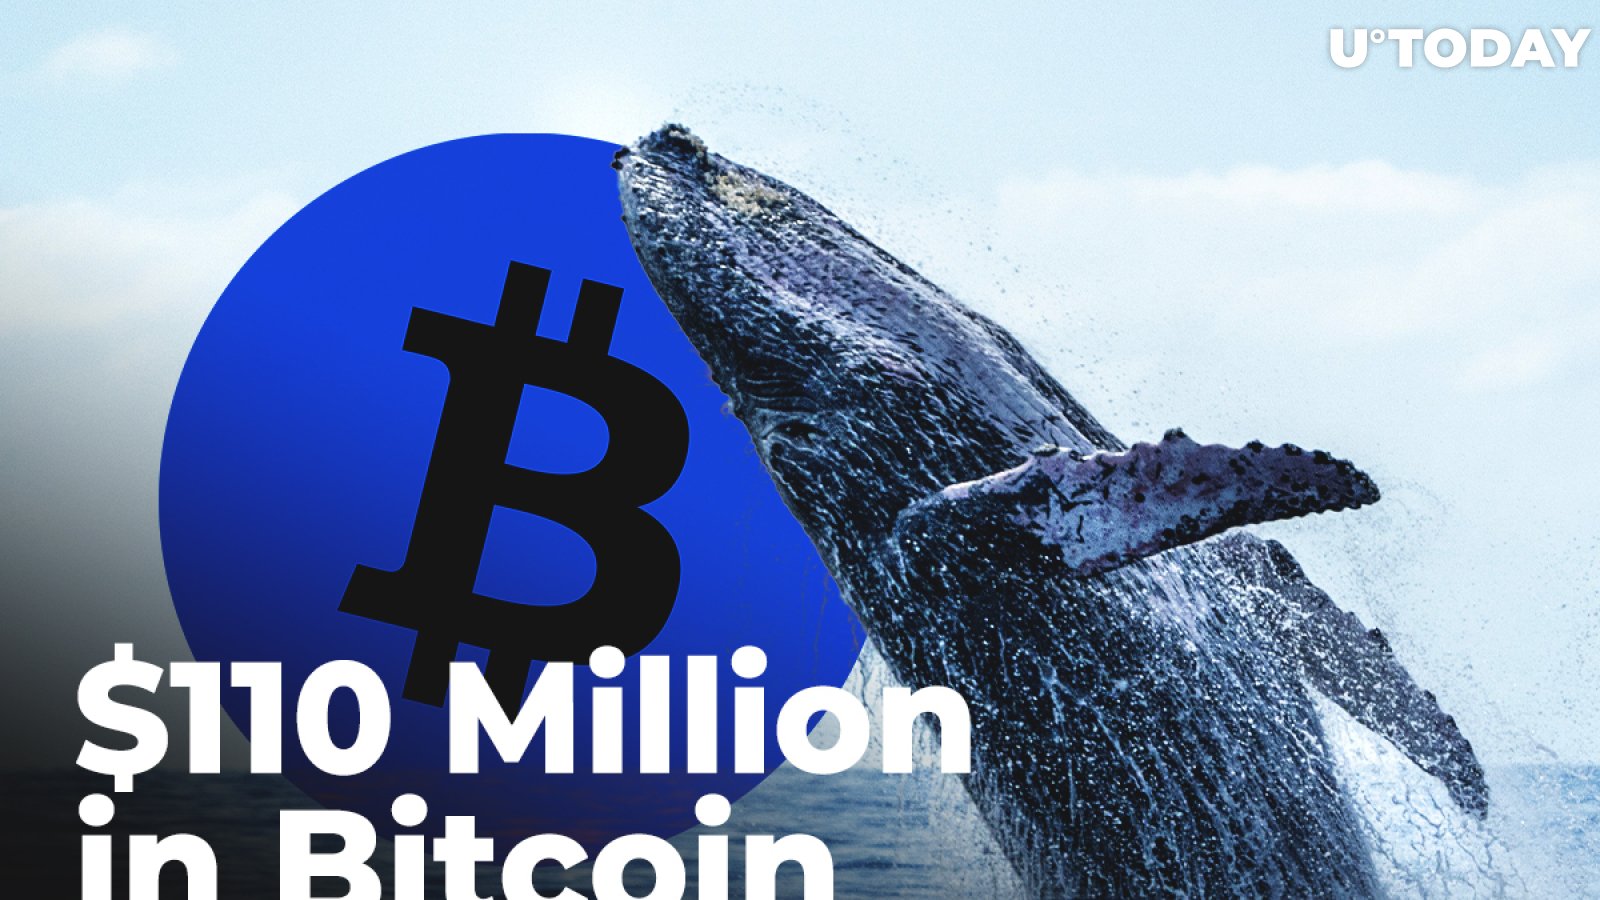 Old-Time Bitcoiners Shift $110 Million in BTC Mined in 2011 For the First Time